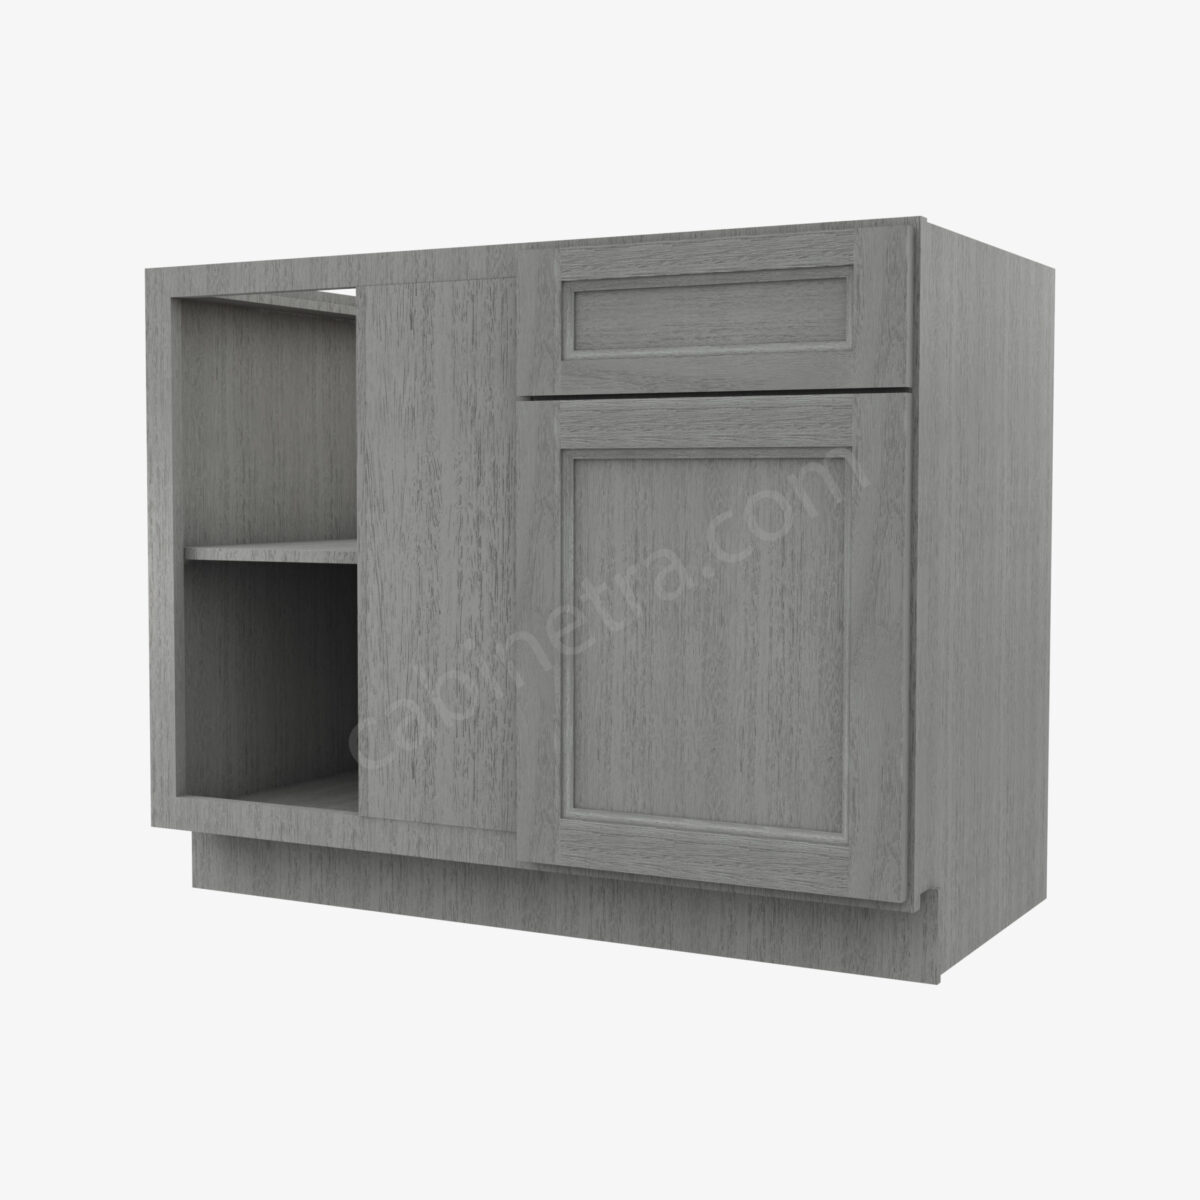 TG BBLC45 48 42W 0 Forevermark Midtown Grey Cabinetra scaled